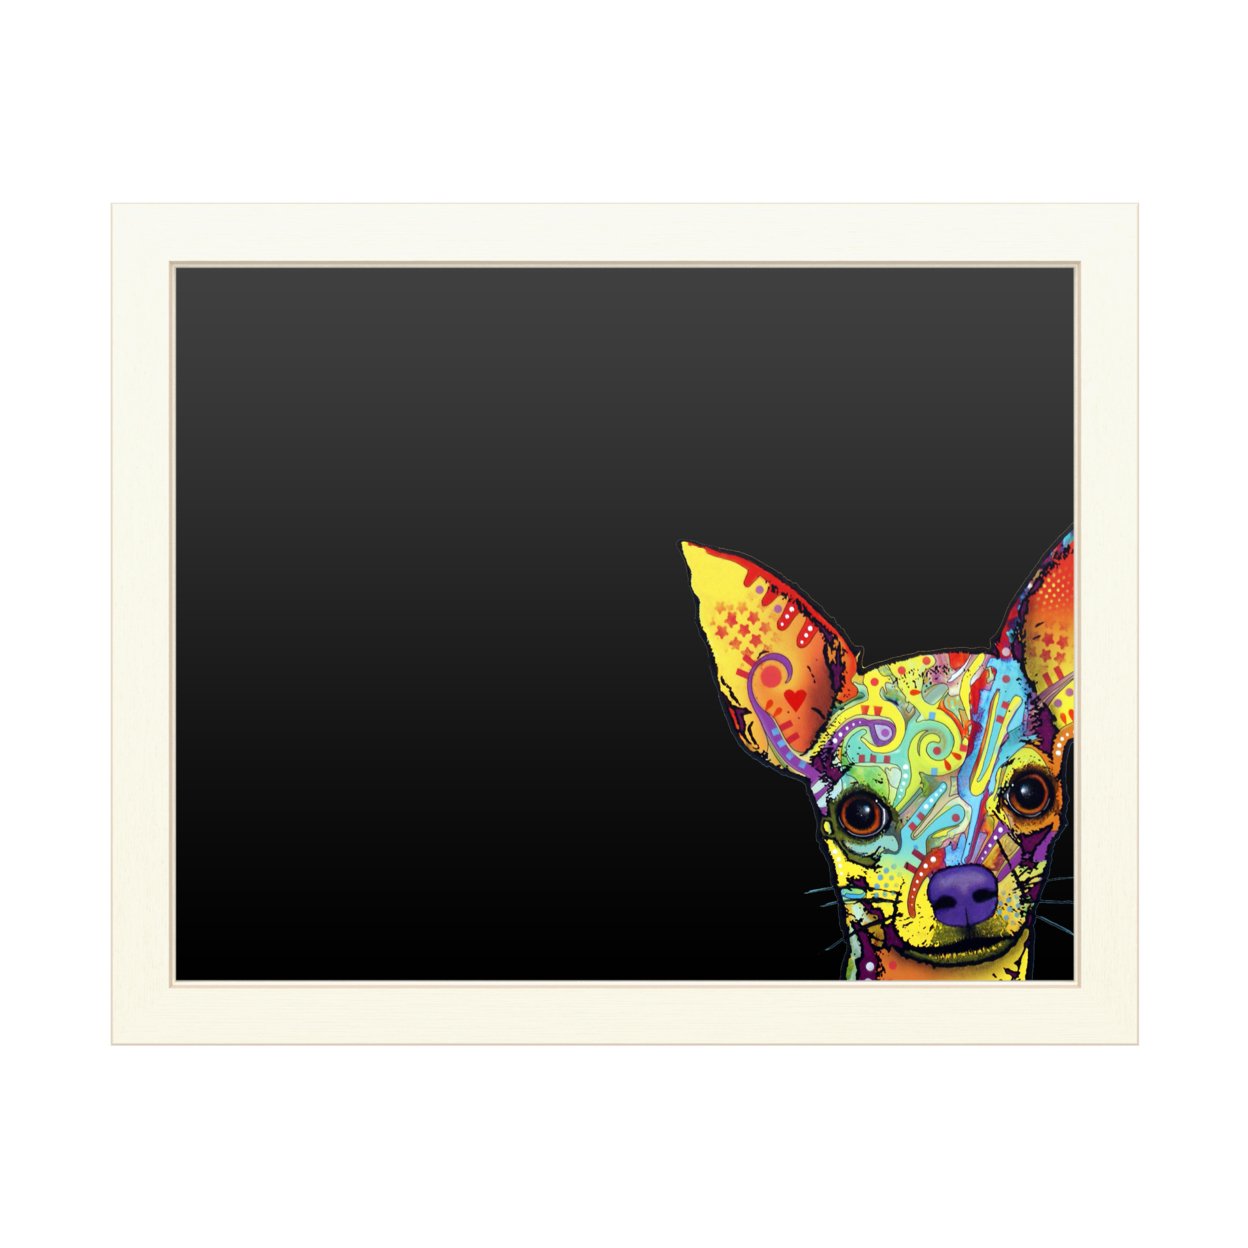 16 X 20 Chalk Board With Printed Artwork - Dean Russo Chihuahua White Board - Ready To Hang Chalkboard